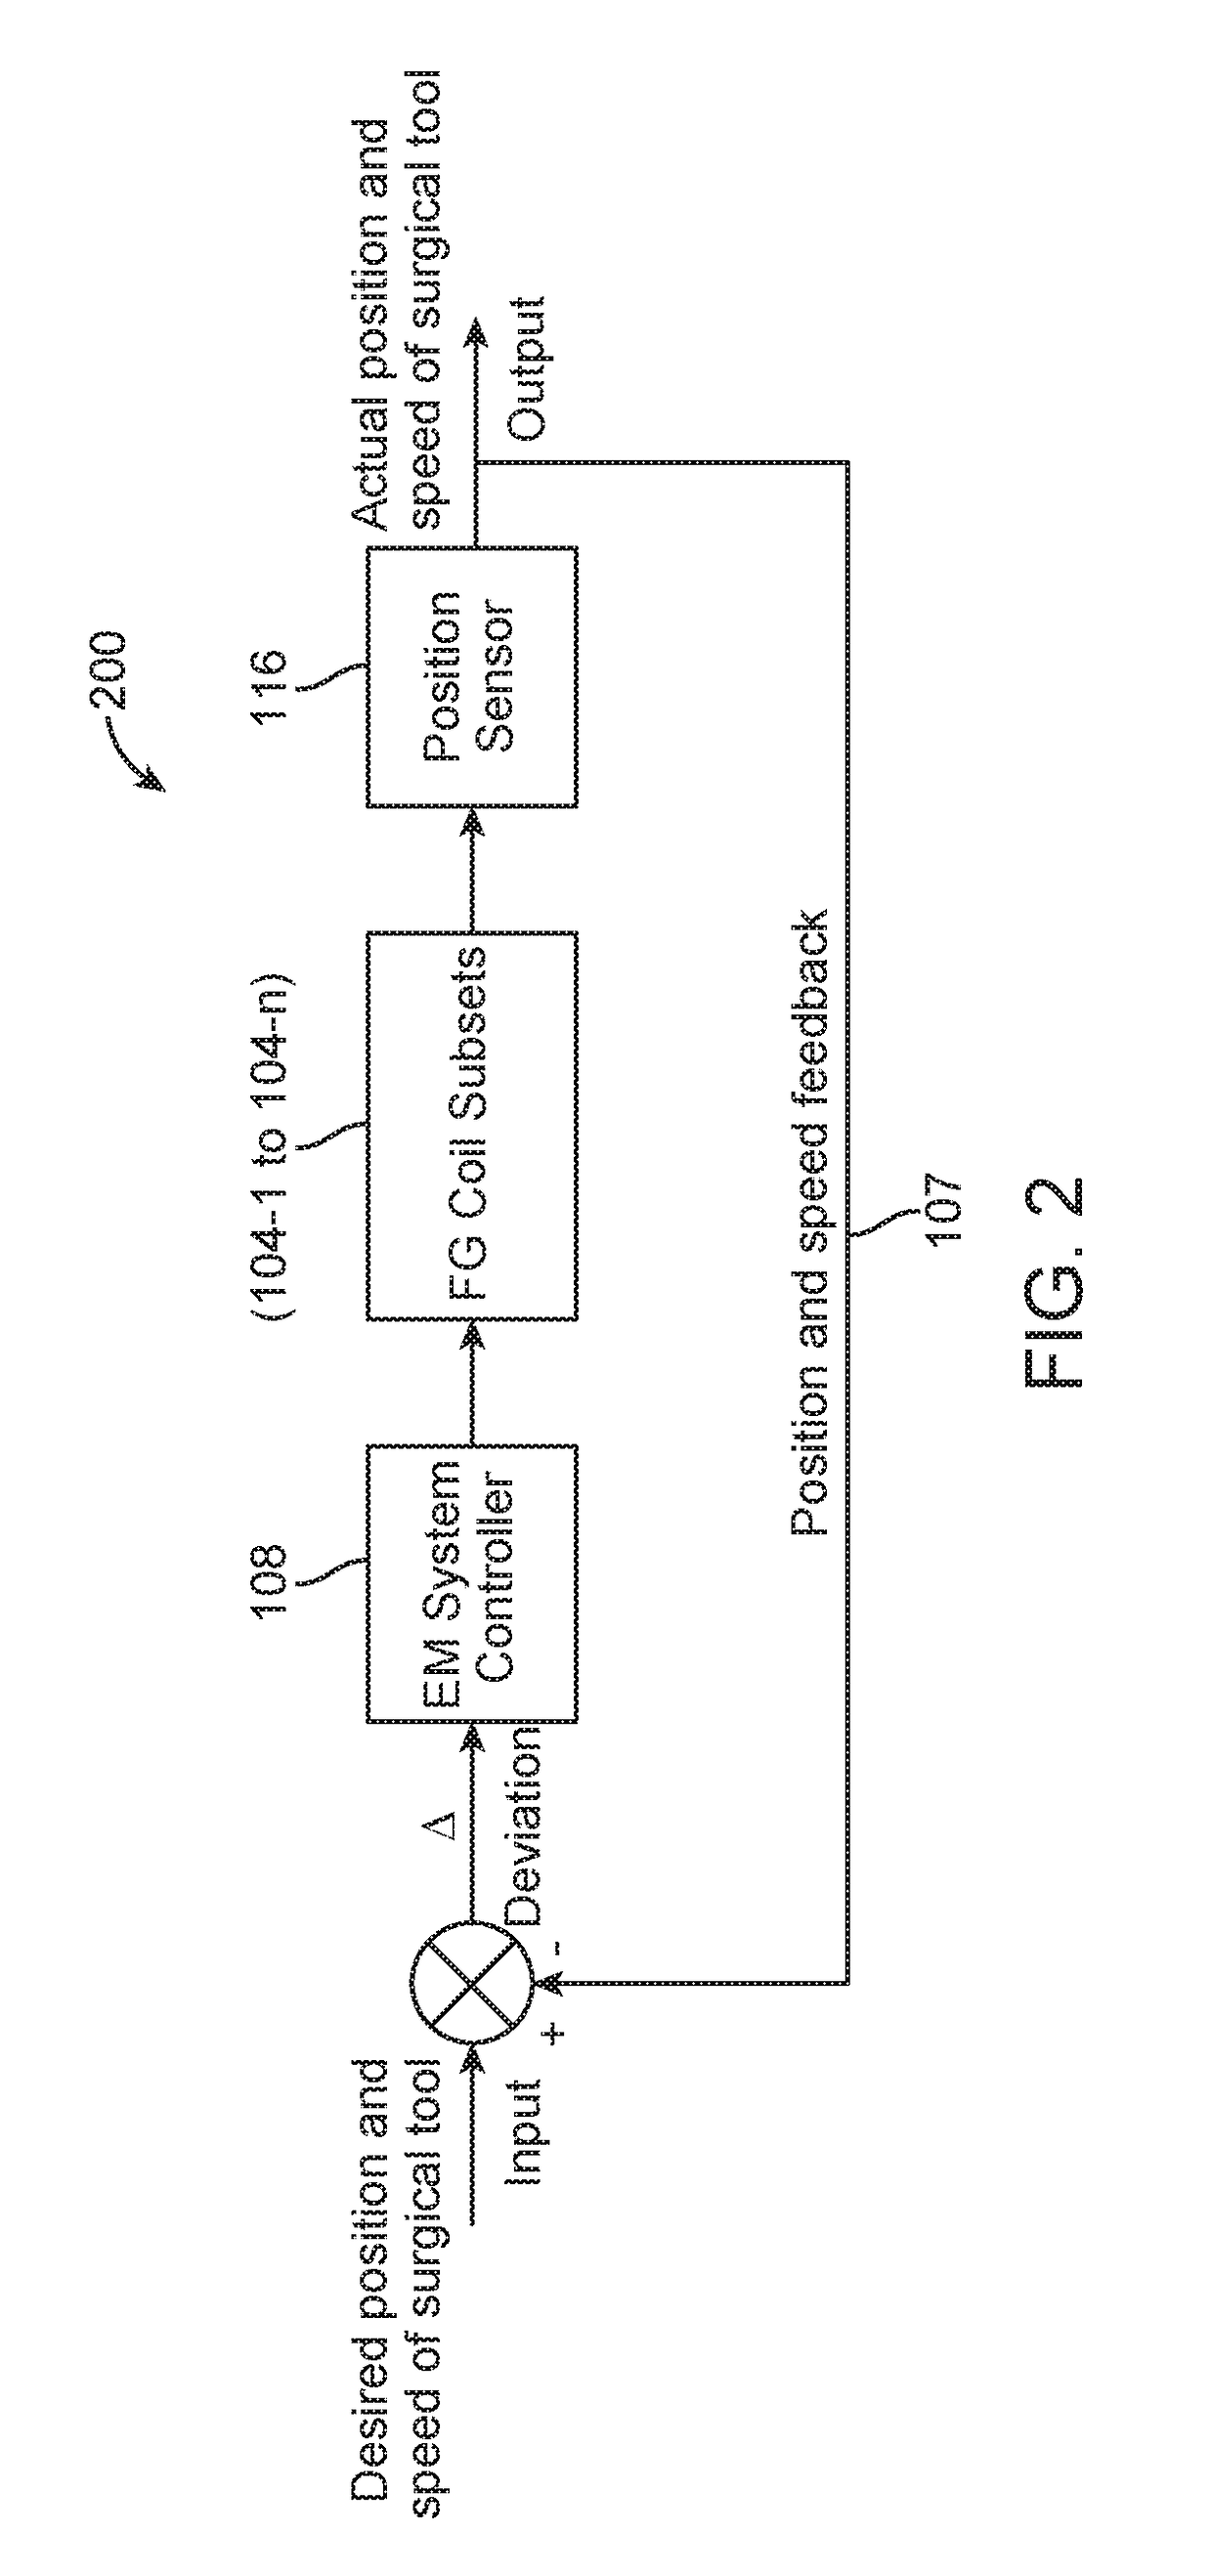 Electromagnetic tracking surgical system and method of controlling the same